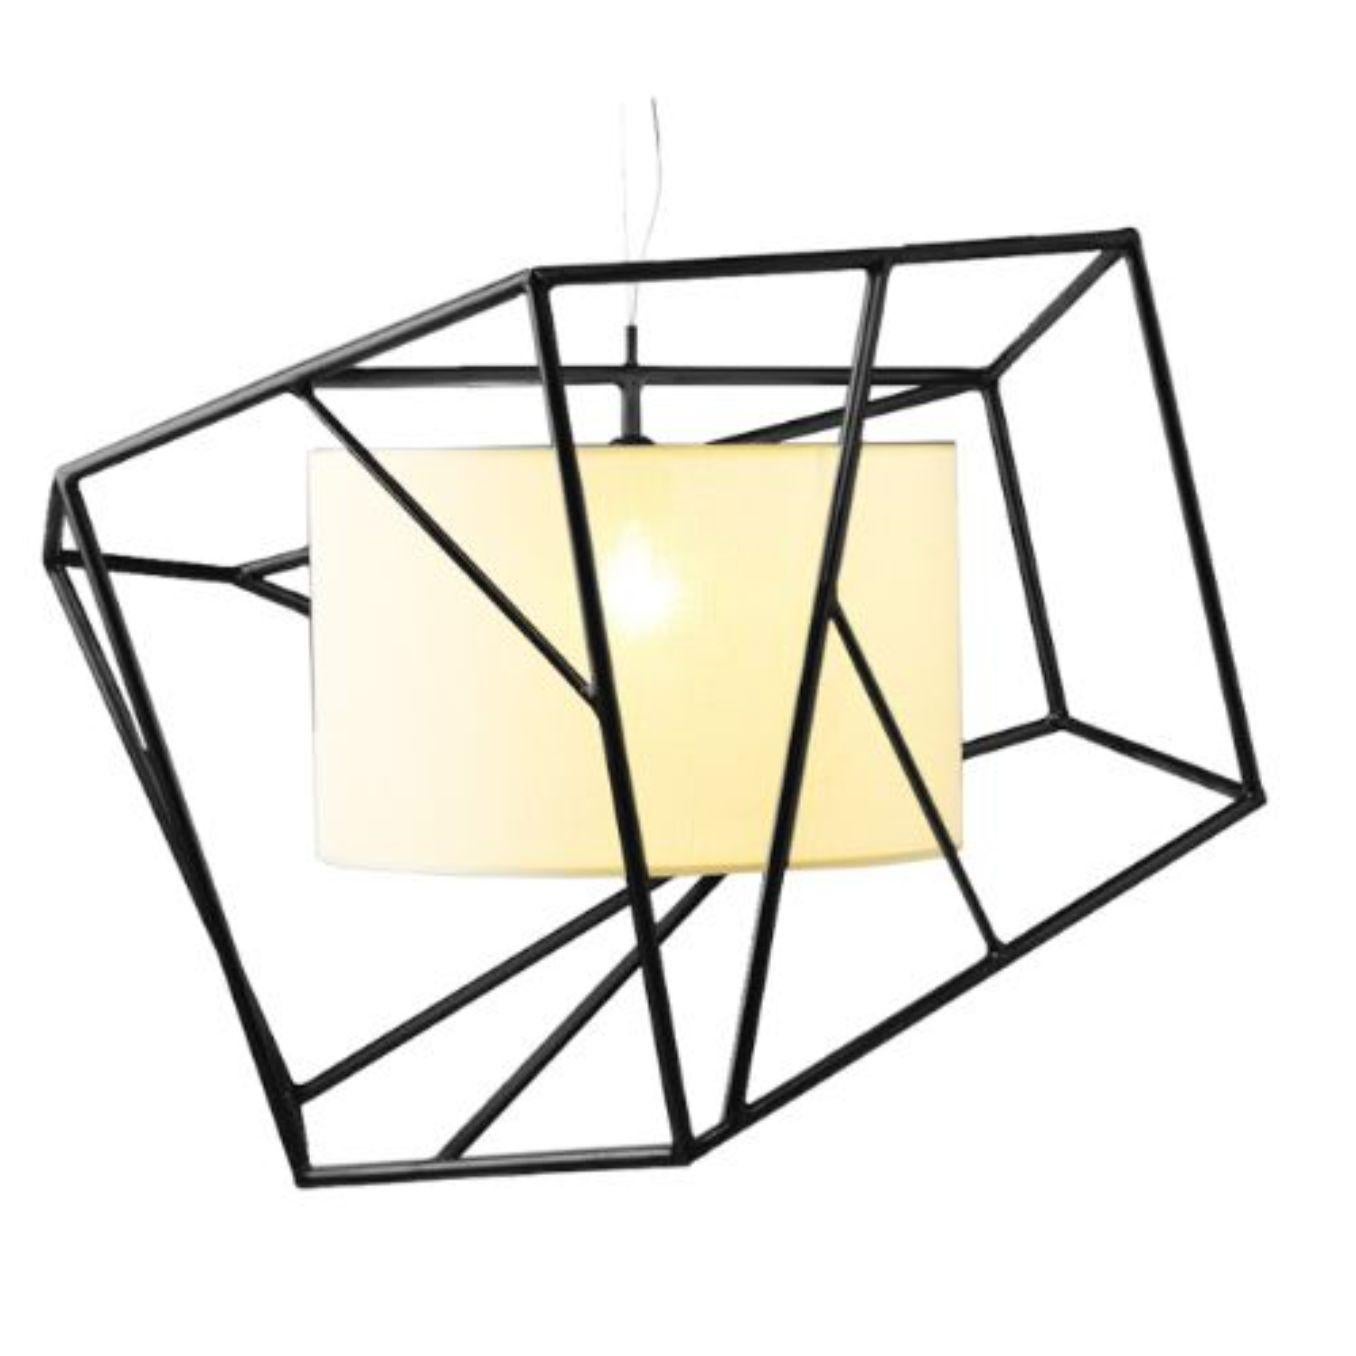 Black Star suspension lamp by Dooq
Dimensions: W 80 x D 80 x H 70 cm
Materials: lacquered metal, polished or satin metal, cotton.
Also available in different colors and materials.

Information:
230V/50Hz
E27/1x20W LED
120V/60Hz
E26/1x15W